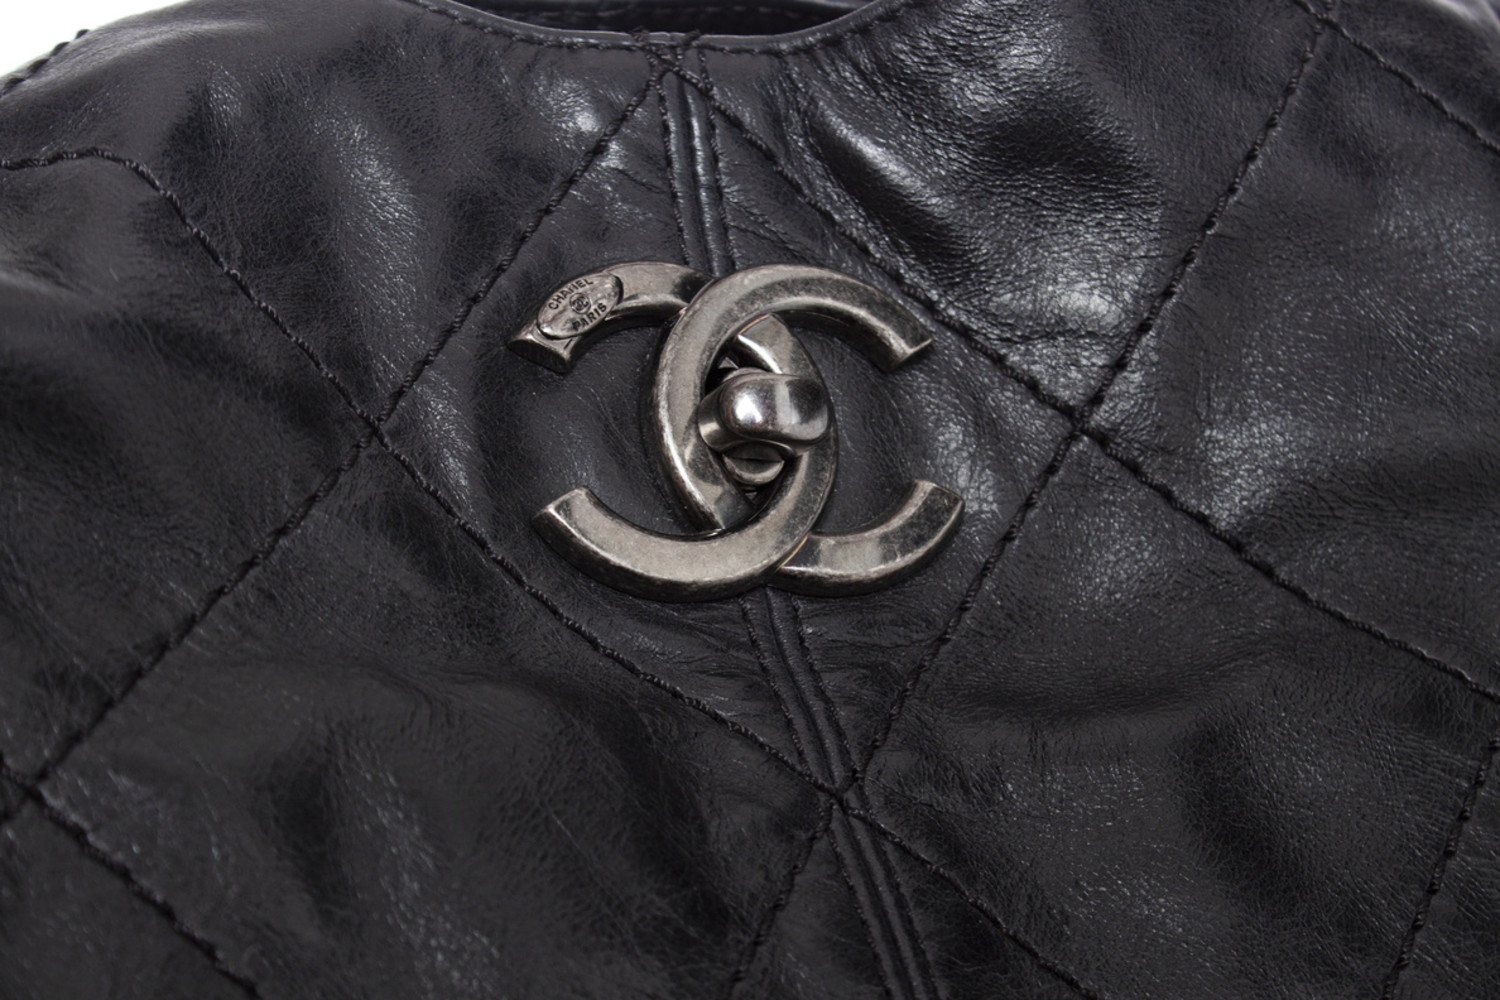 Chanel Hobo Leather Shoulder Bag in Rust - J'adore Fashion Boutique